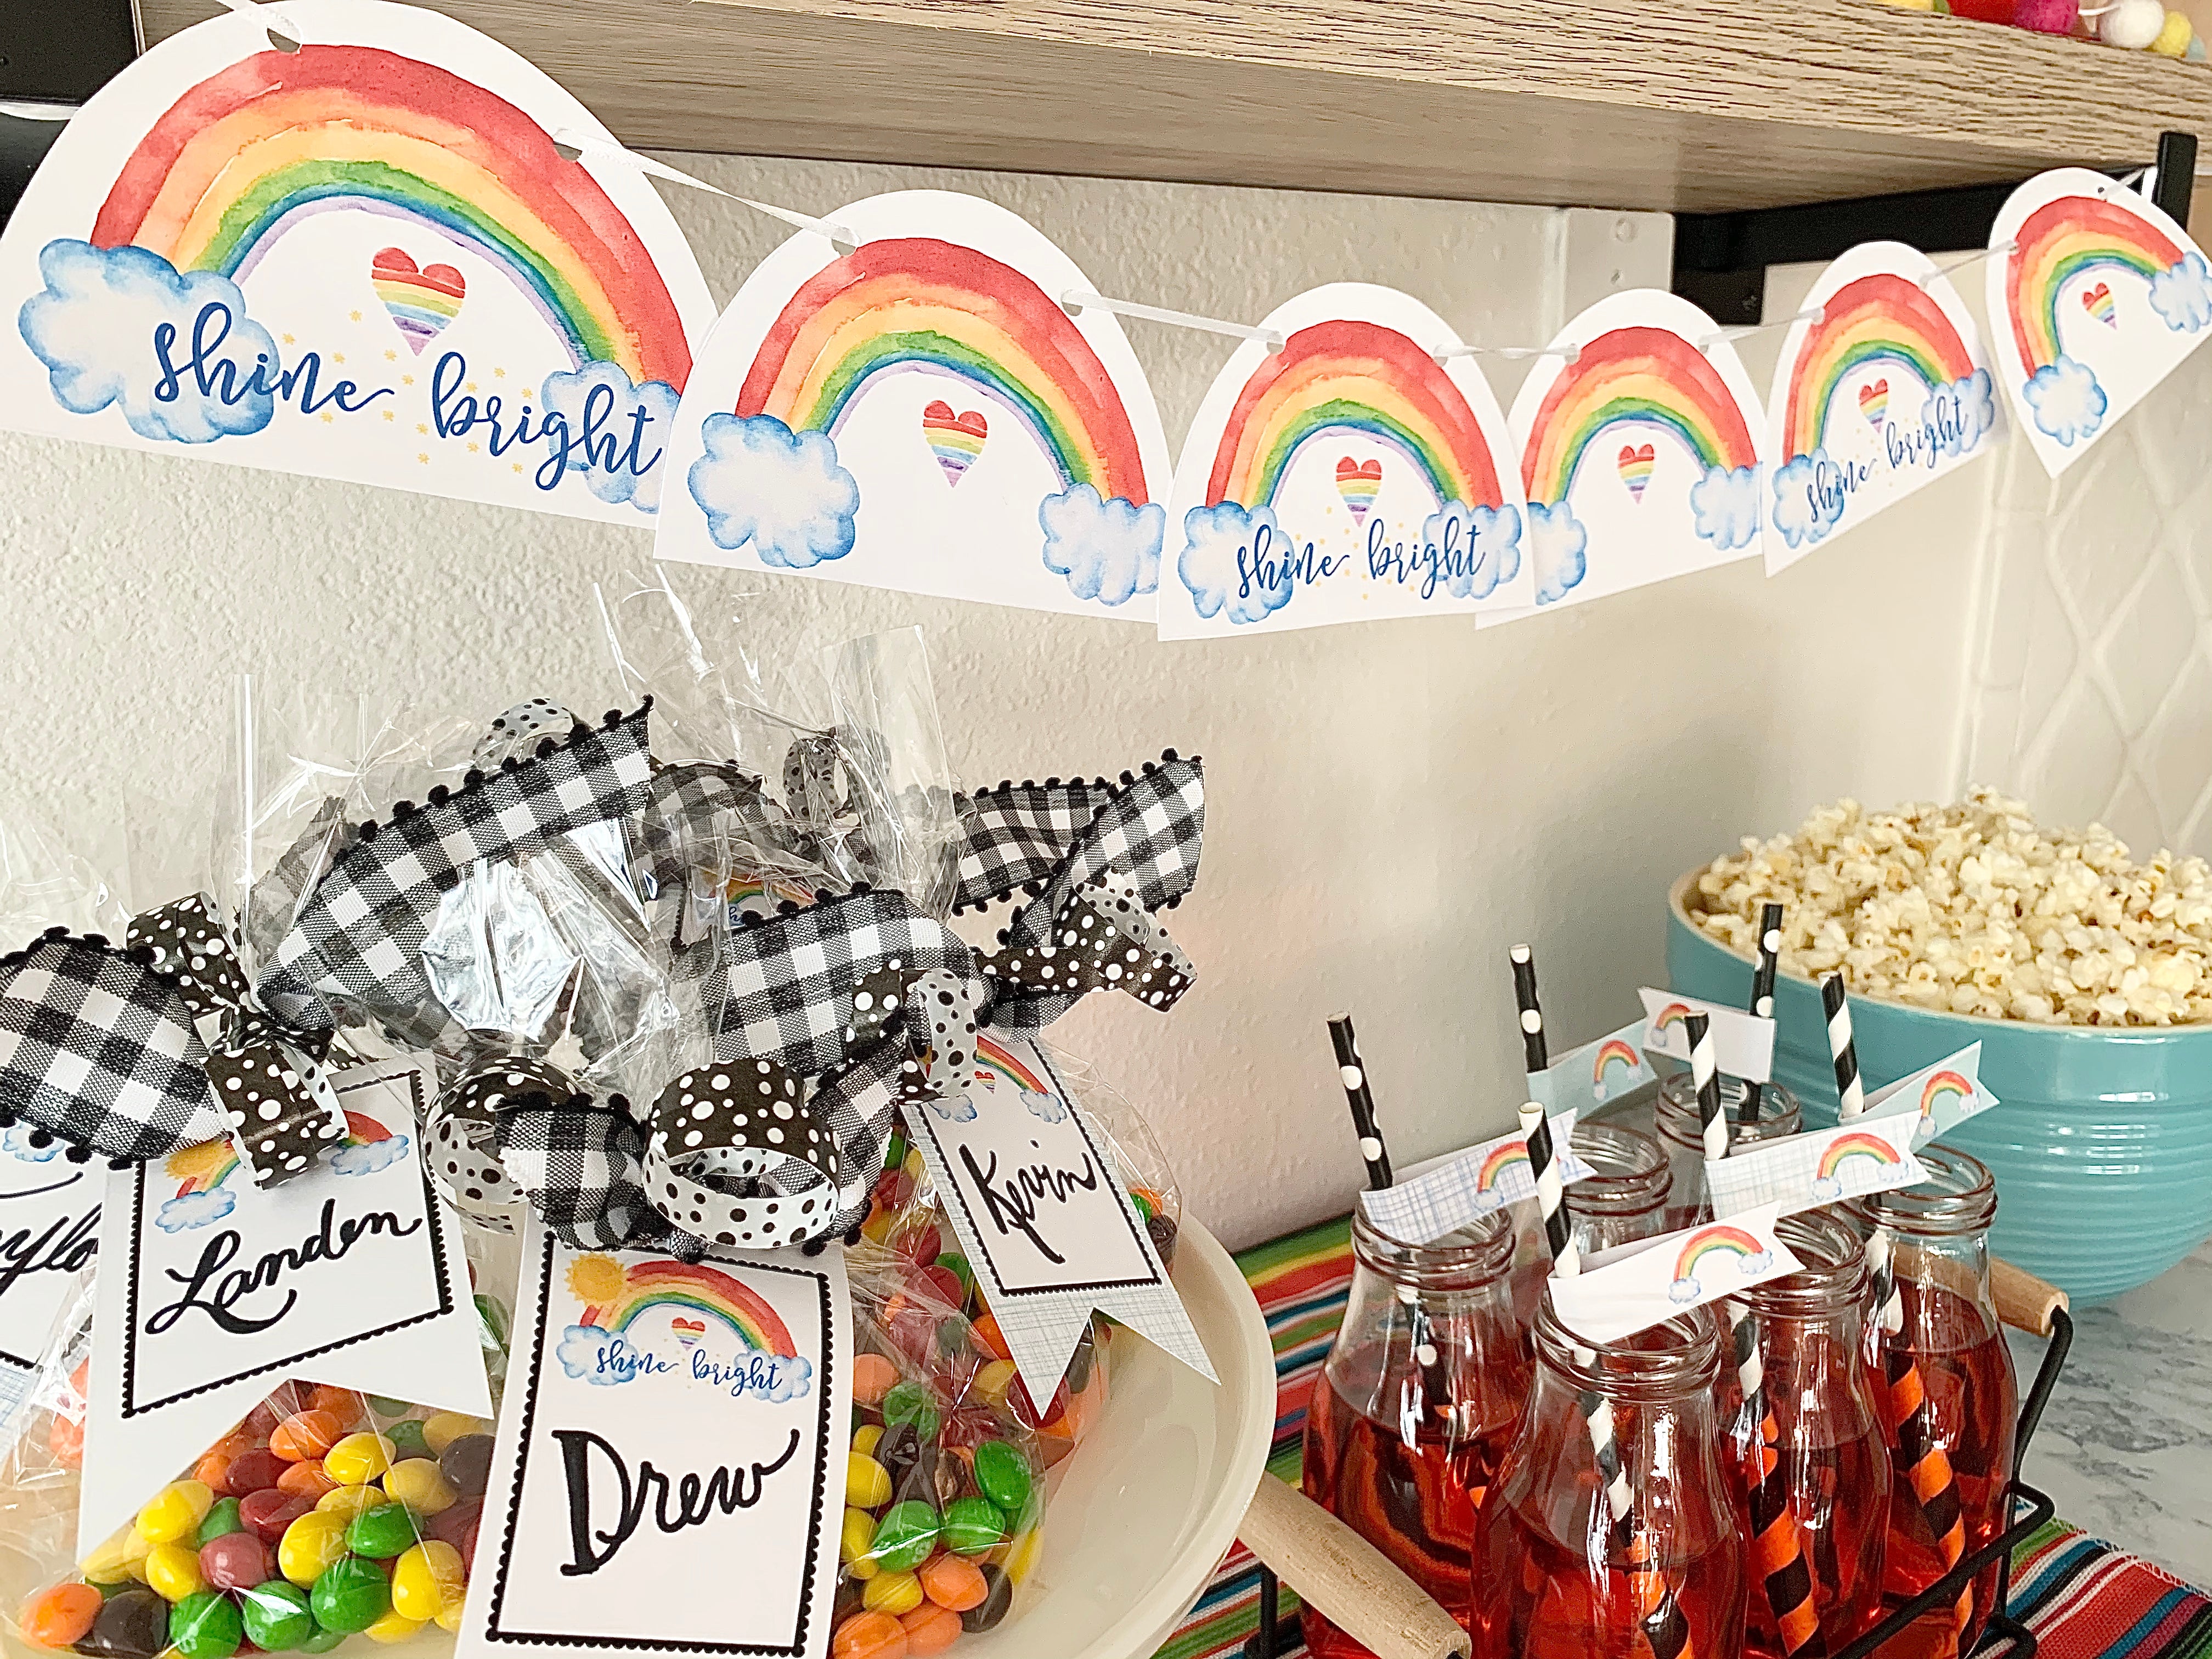 Printable Rainbow Party Package, Printable Rainbow Party